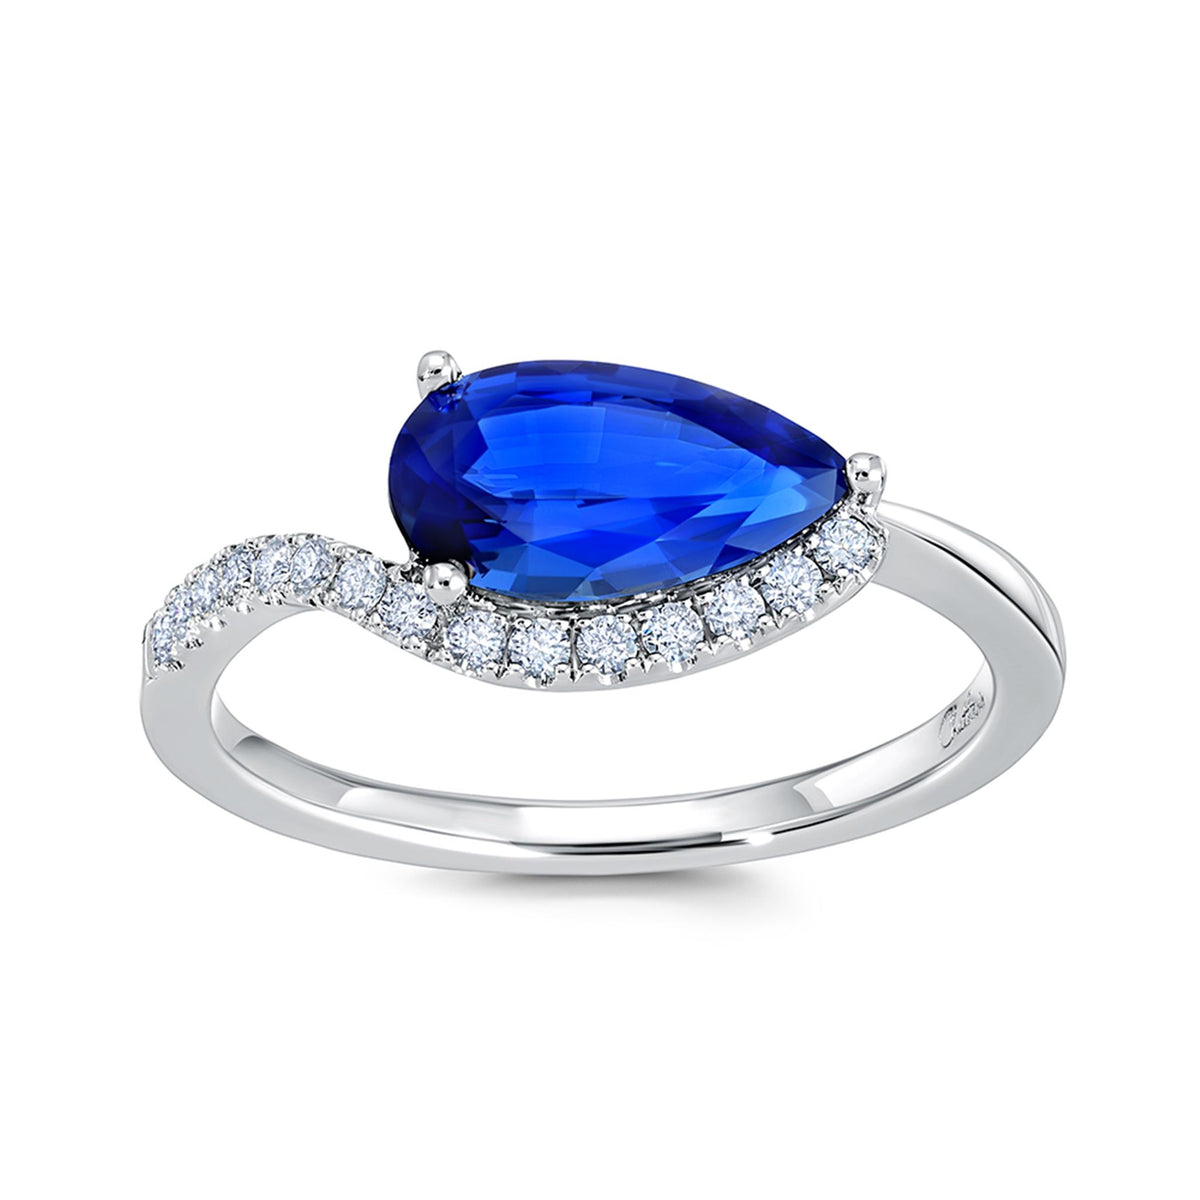 14Kt White Gold Ring With 1.61ct Chatham Lab Created Blue Sapphire